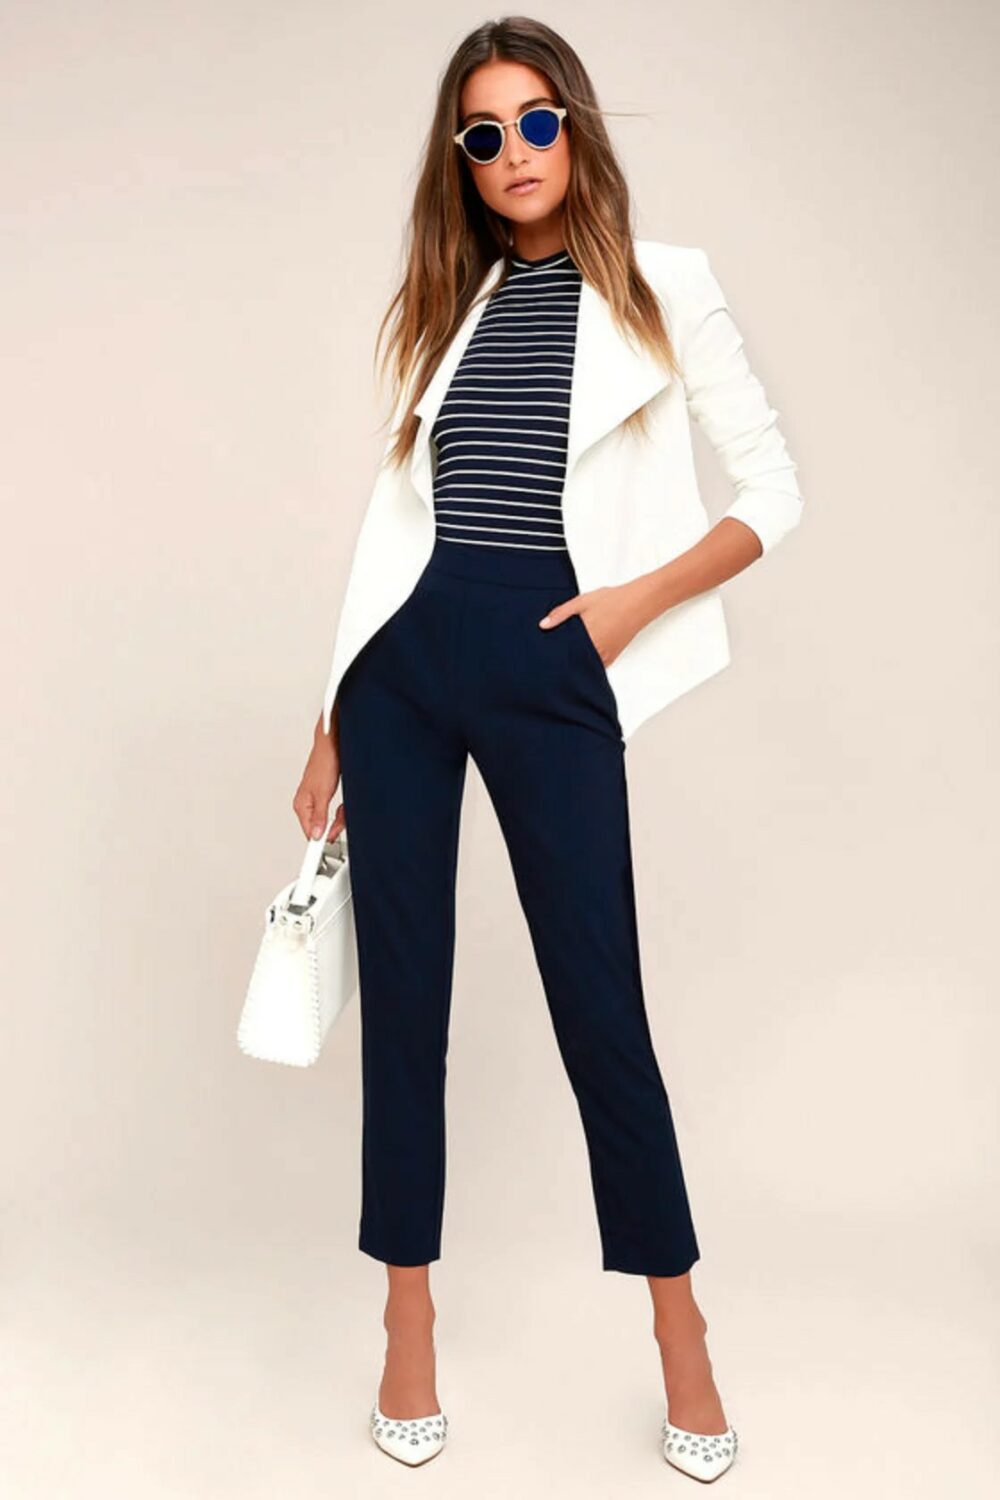 Wear these navy high waisted pants Loose fitting trousers with a slimming ankle cuff. Hidden side zipperhook clasp.